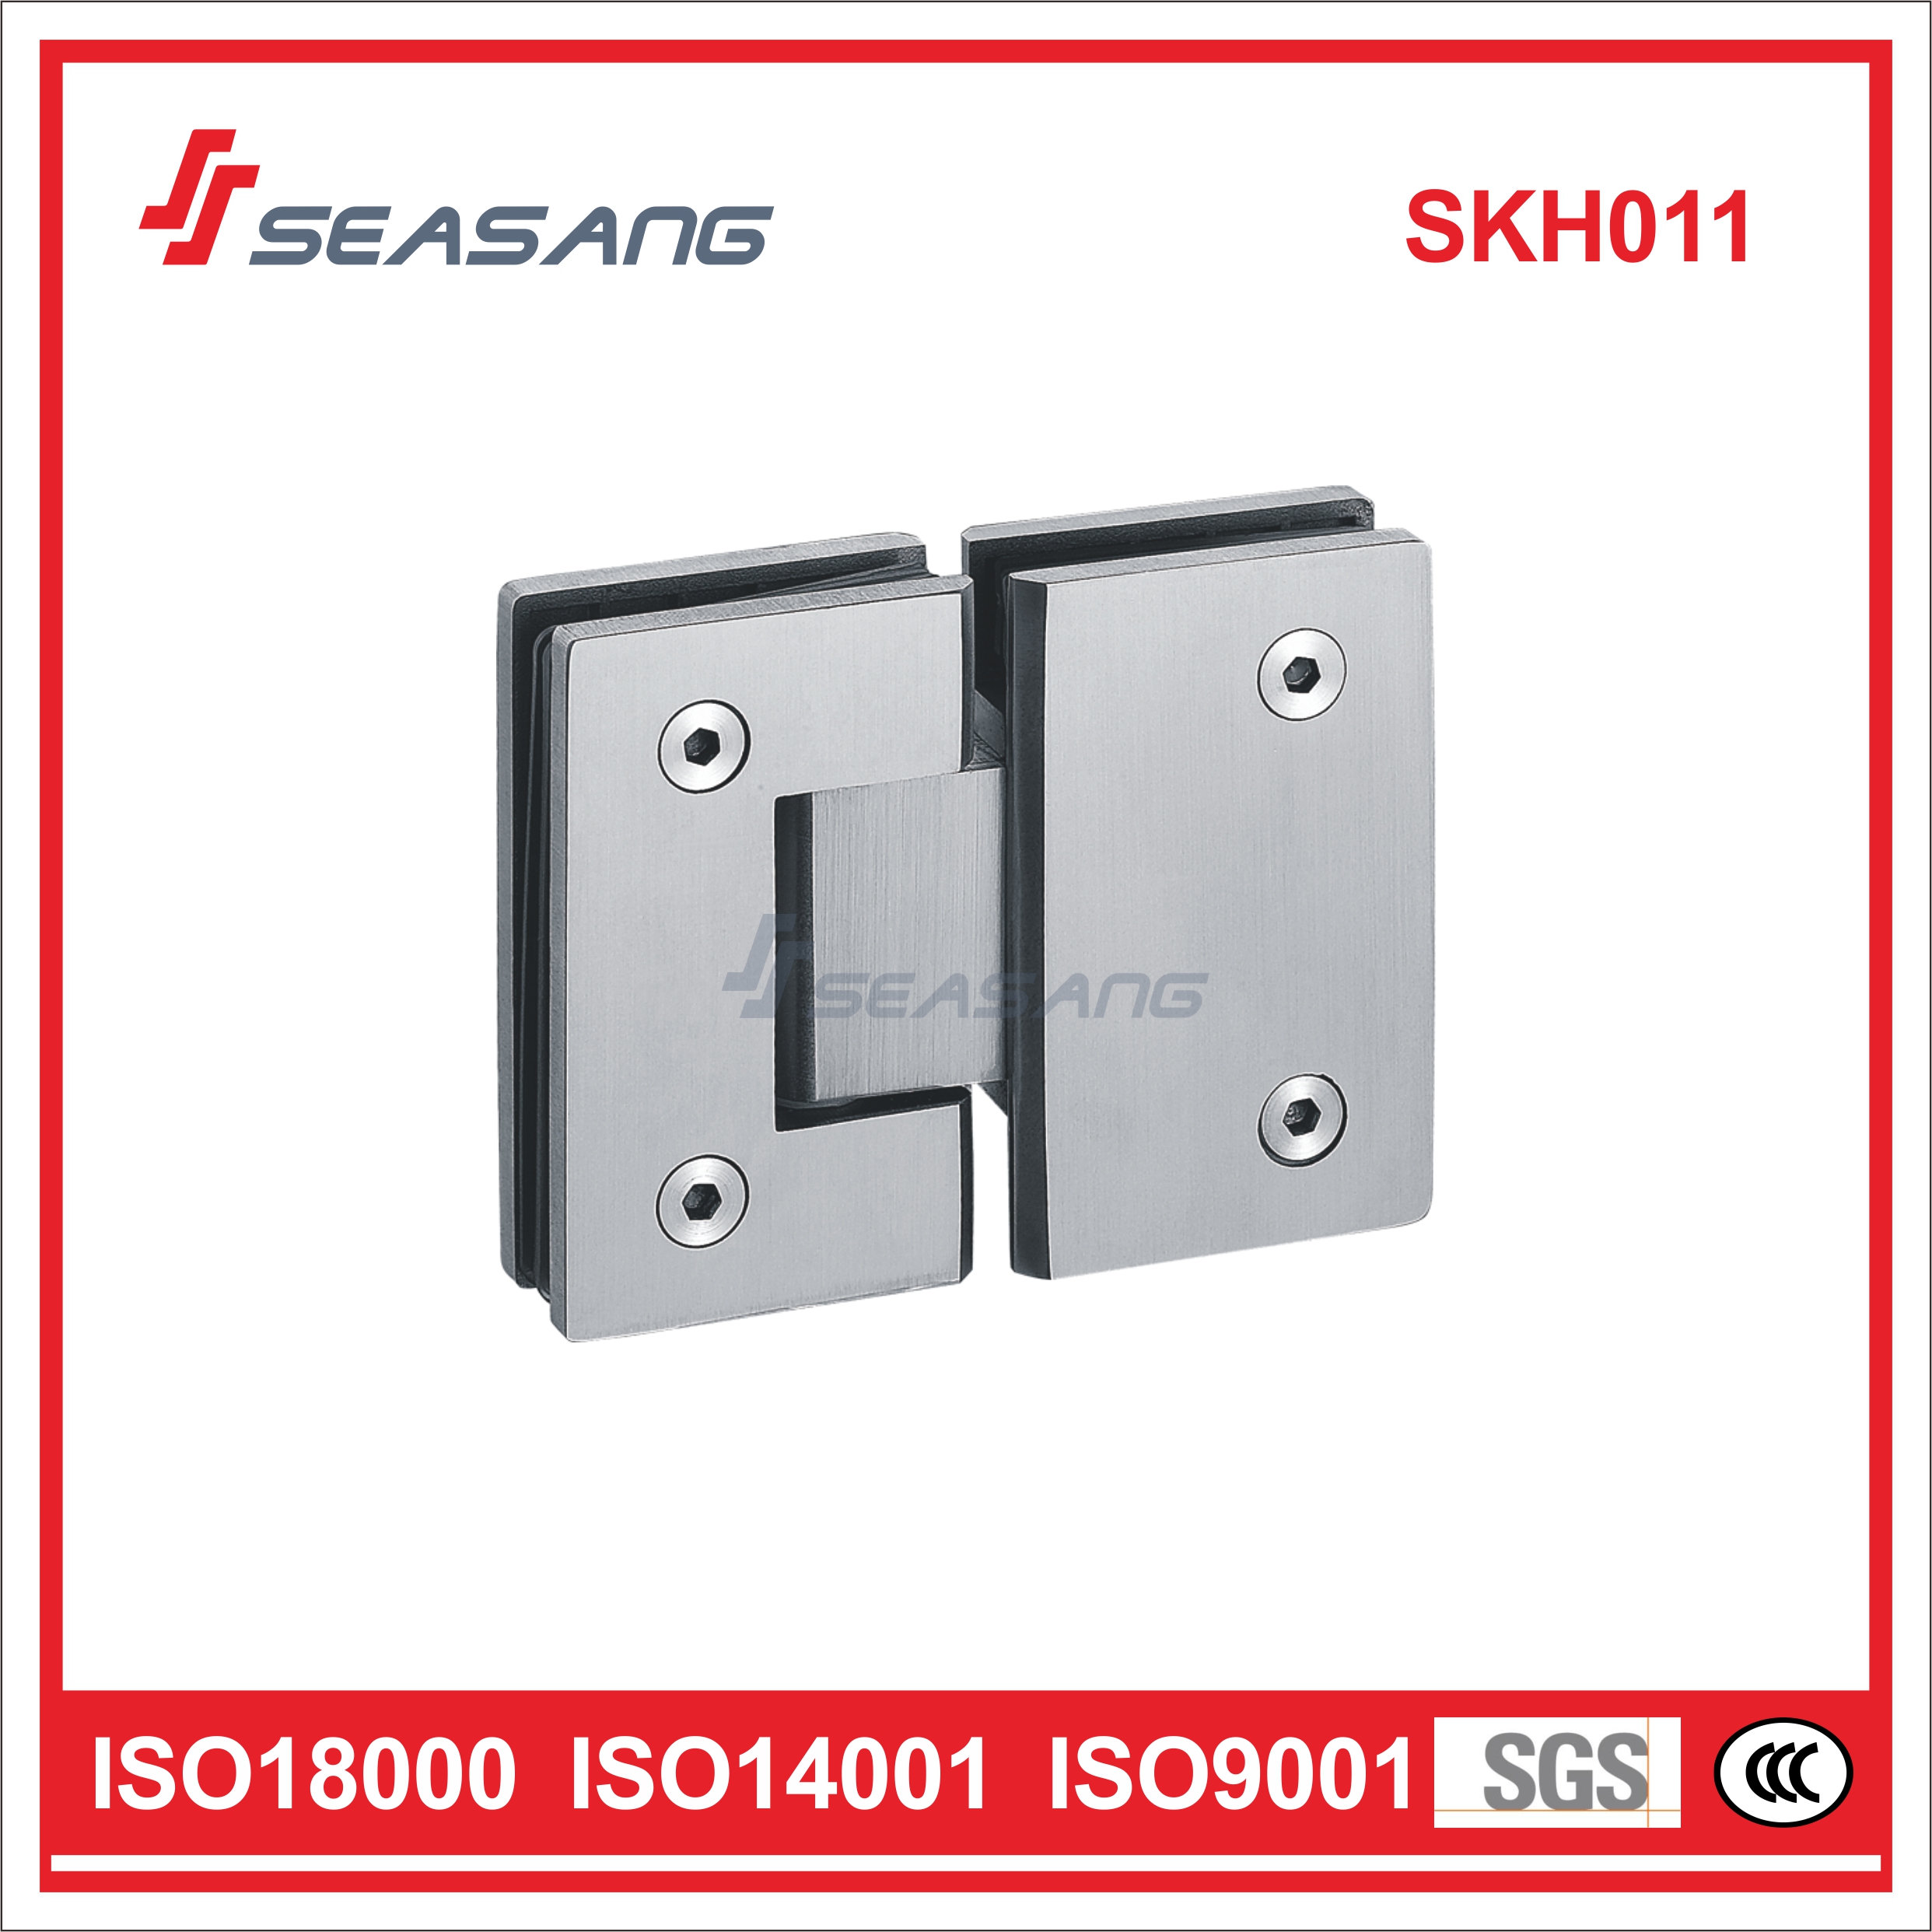 Exploring the Elegance and Functionality of Glass Door Hinges for Glass Shower Doors